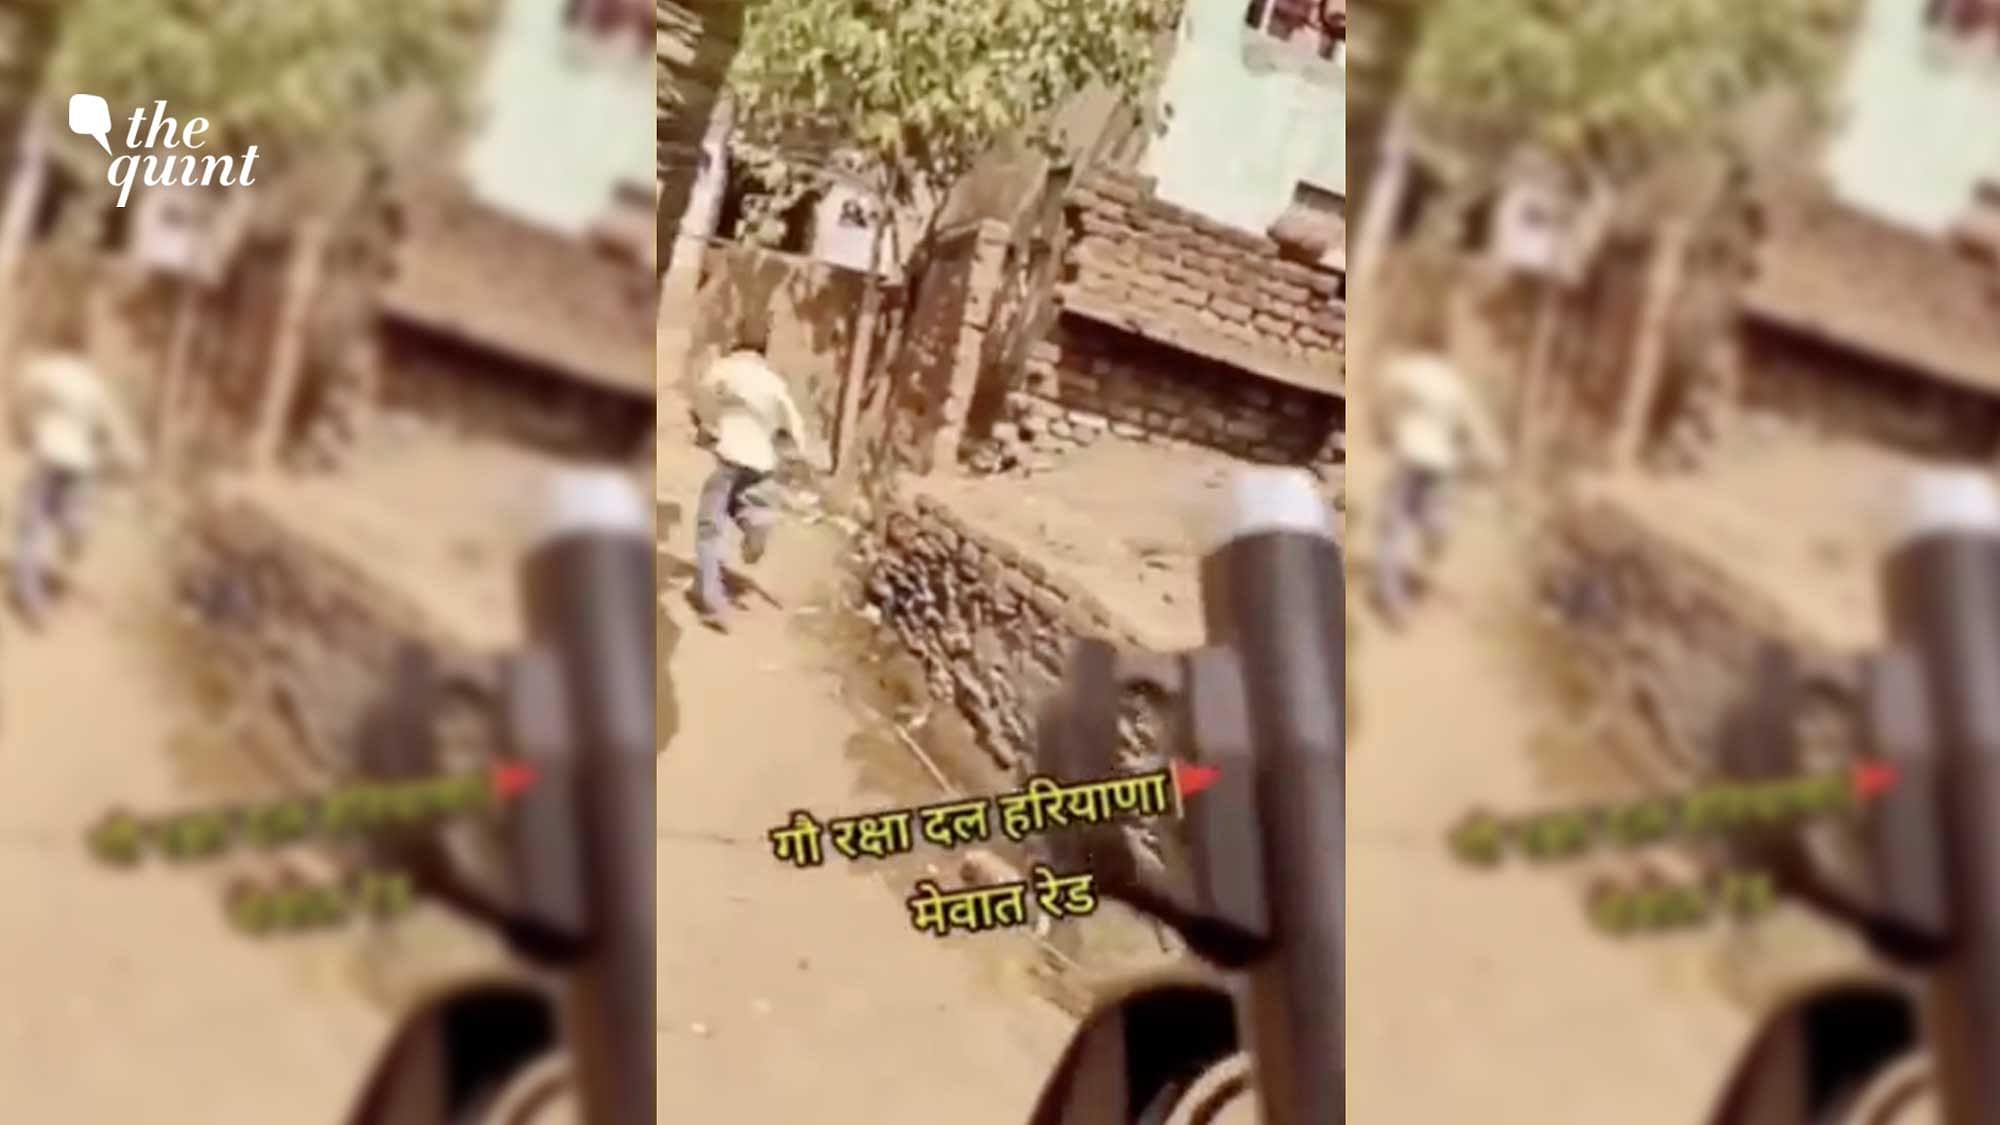 <div class="paragraphs"><p>'Rambhakt Gopal'&nbsp;has posted videos from his Instagram that show him pointing a barrel of a gun out of a car window, threatening children.</p></div>